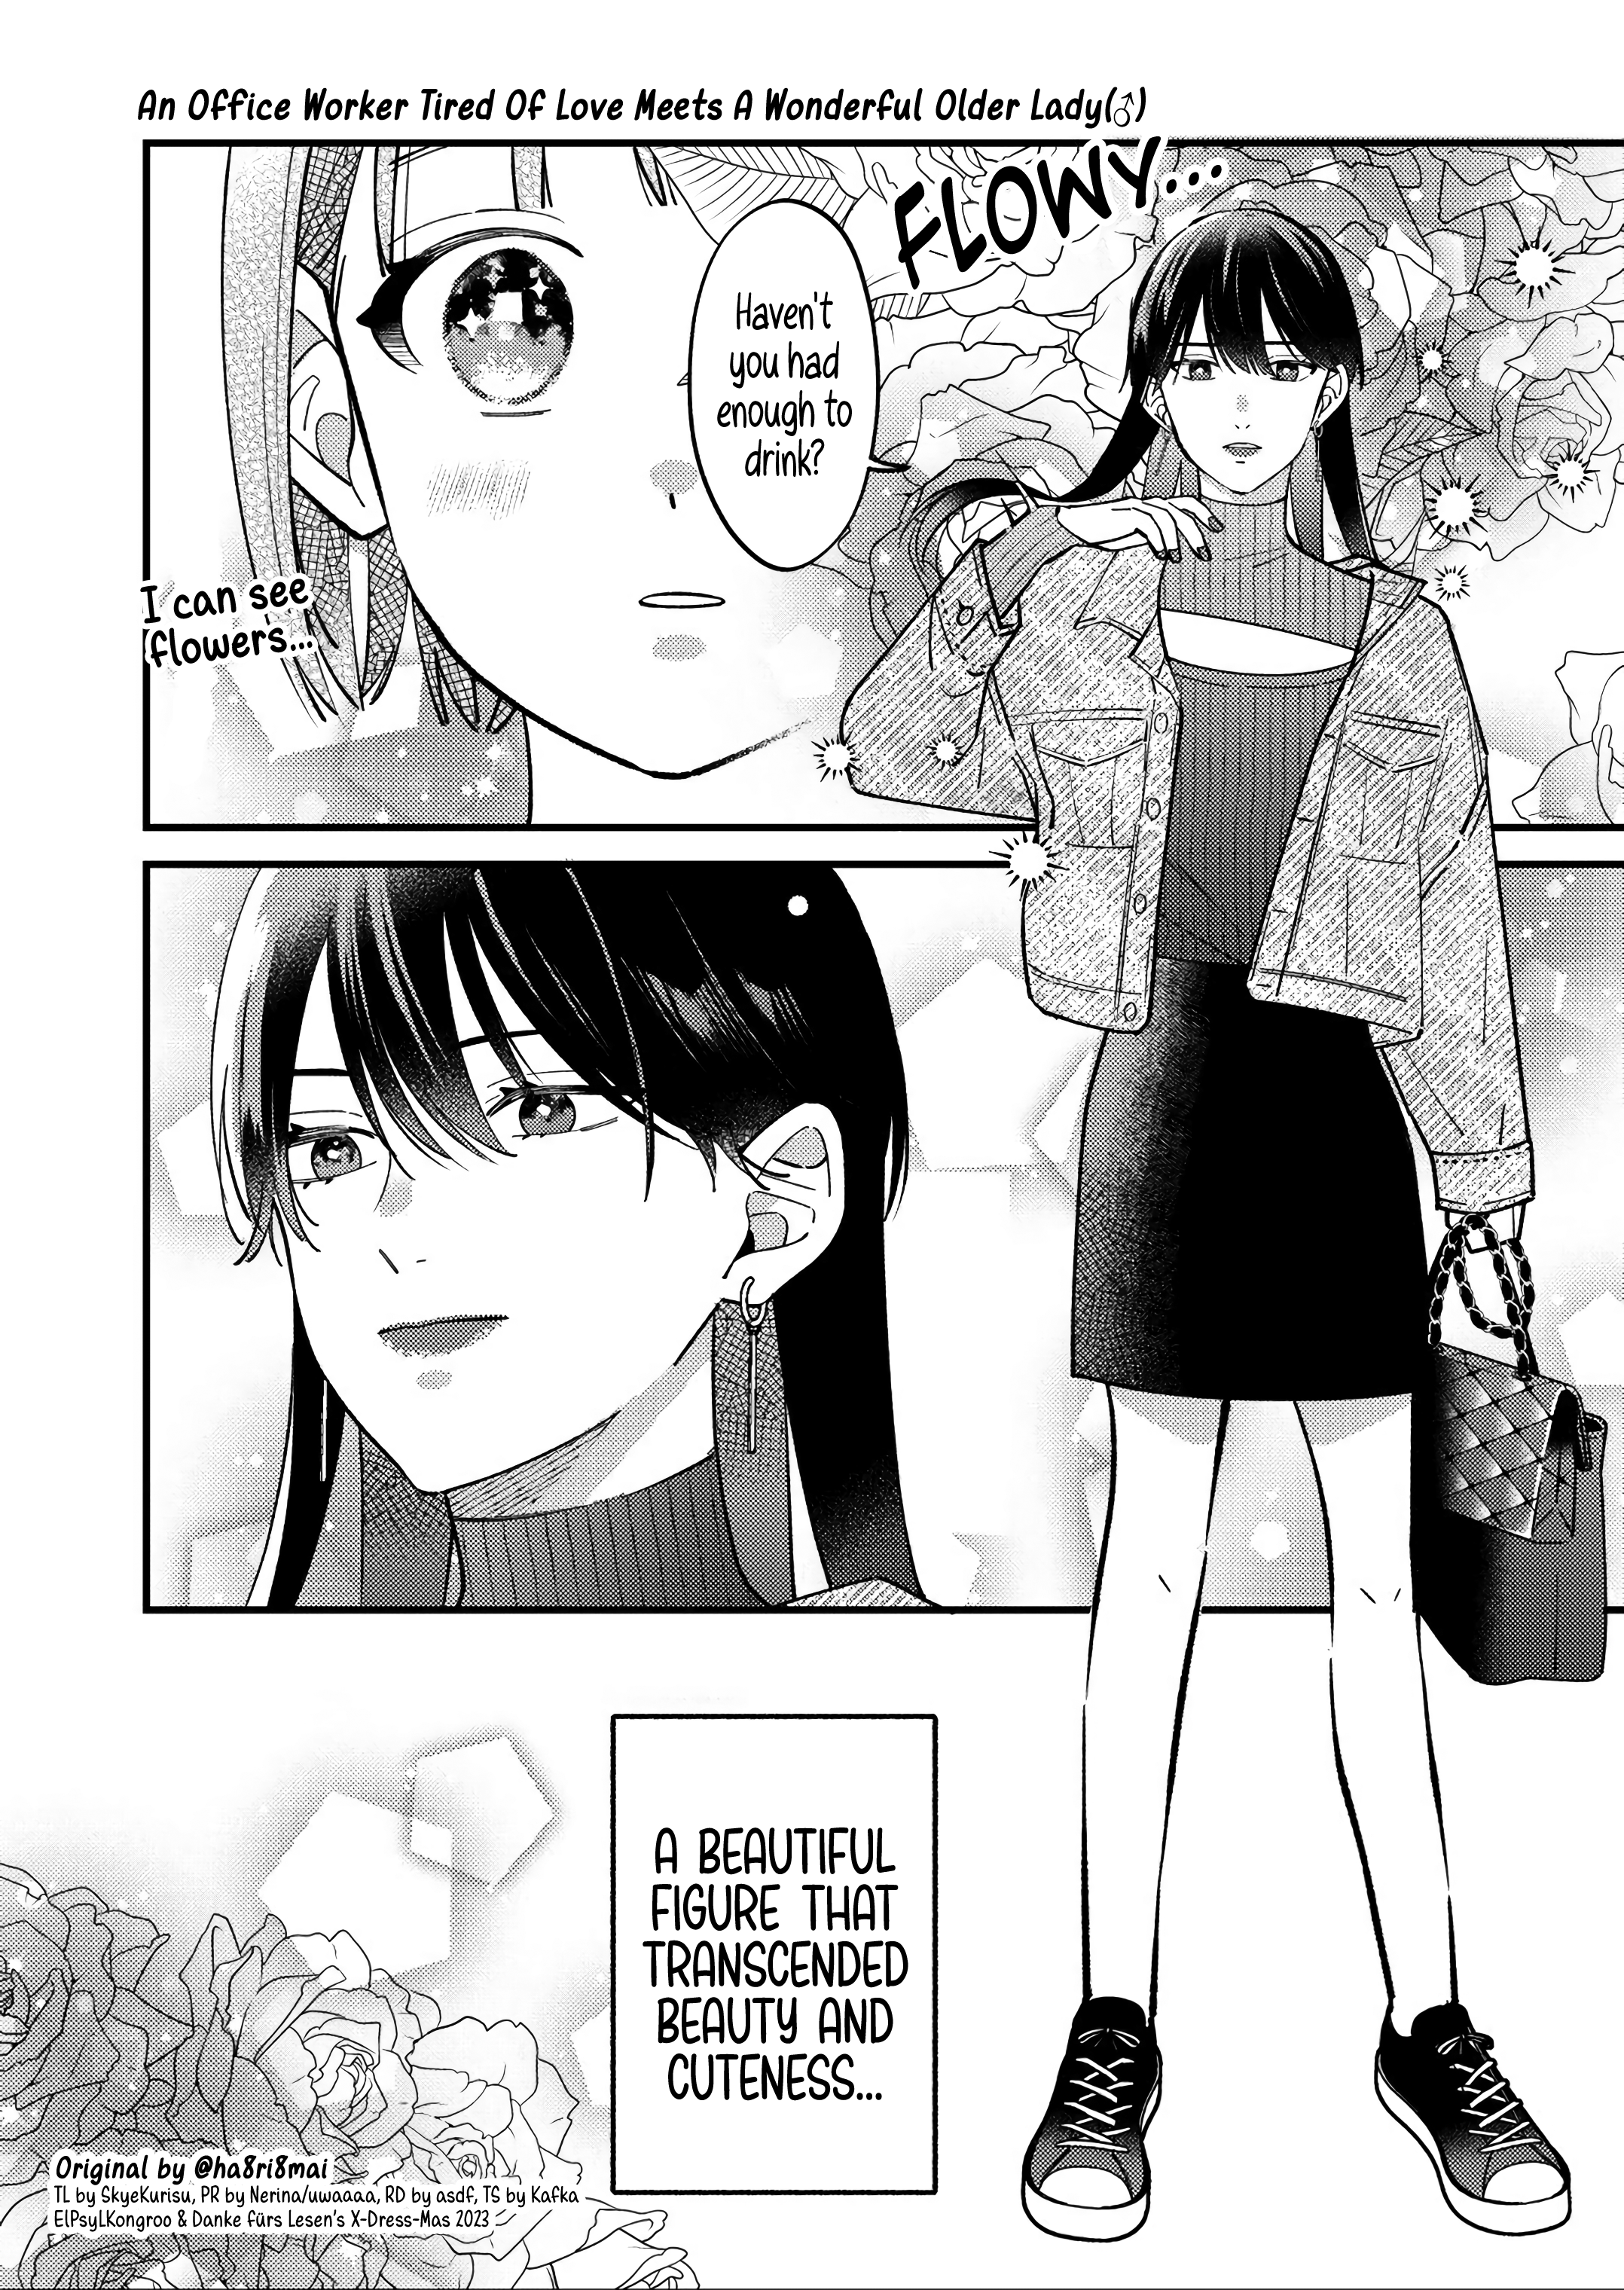 An Office Worker Tired Of Love Meets A Wonderful Older Lady(♂) manga